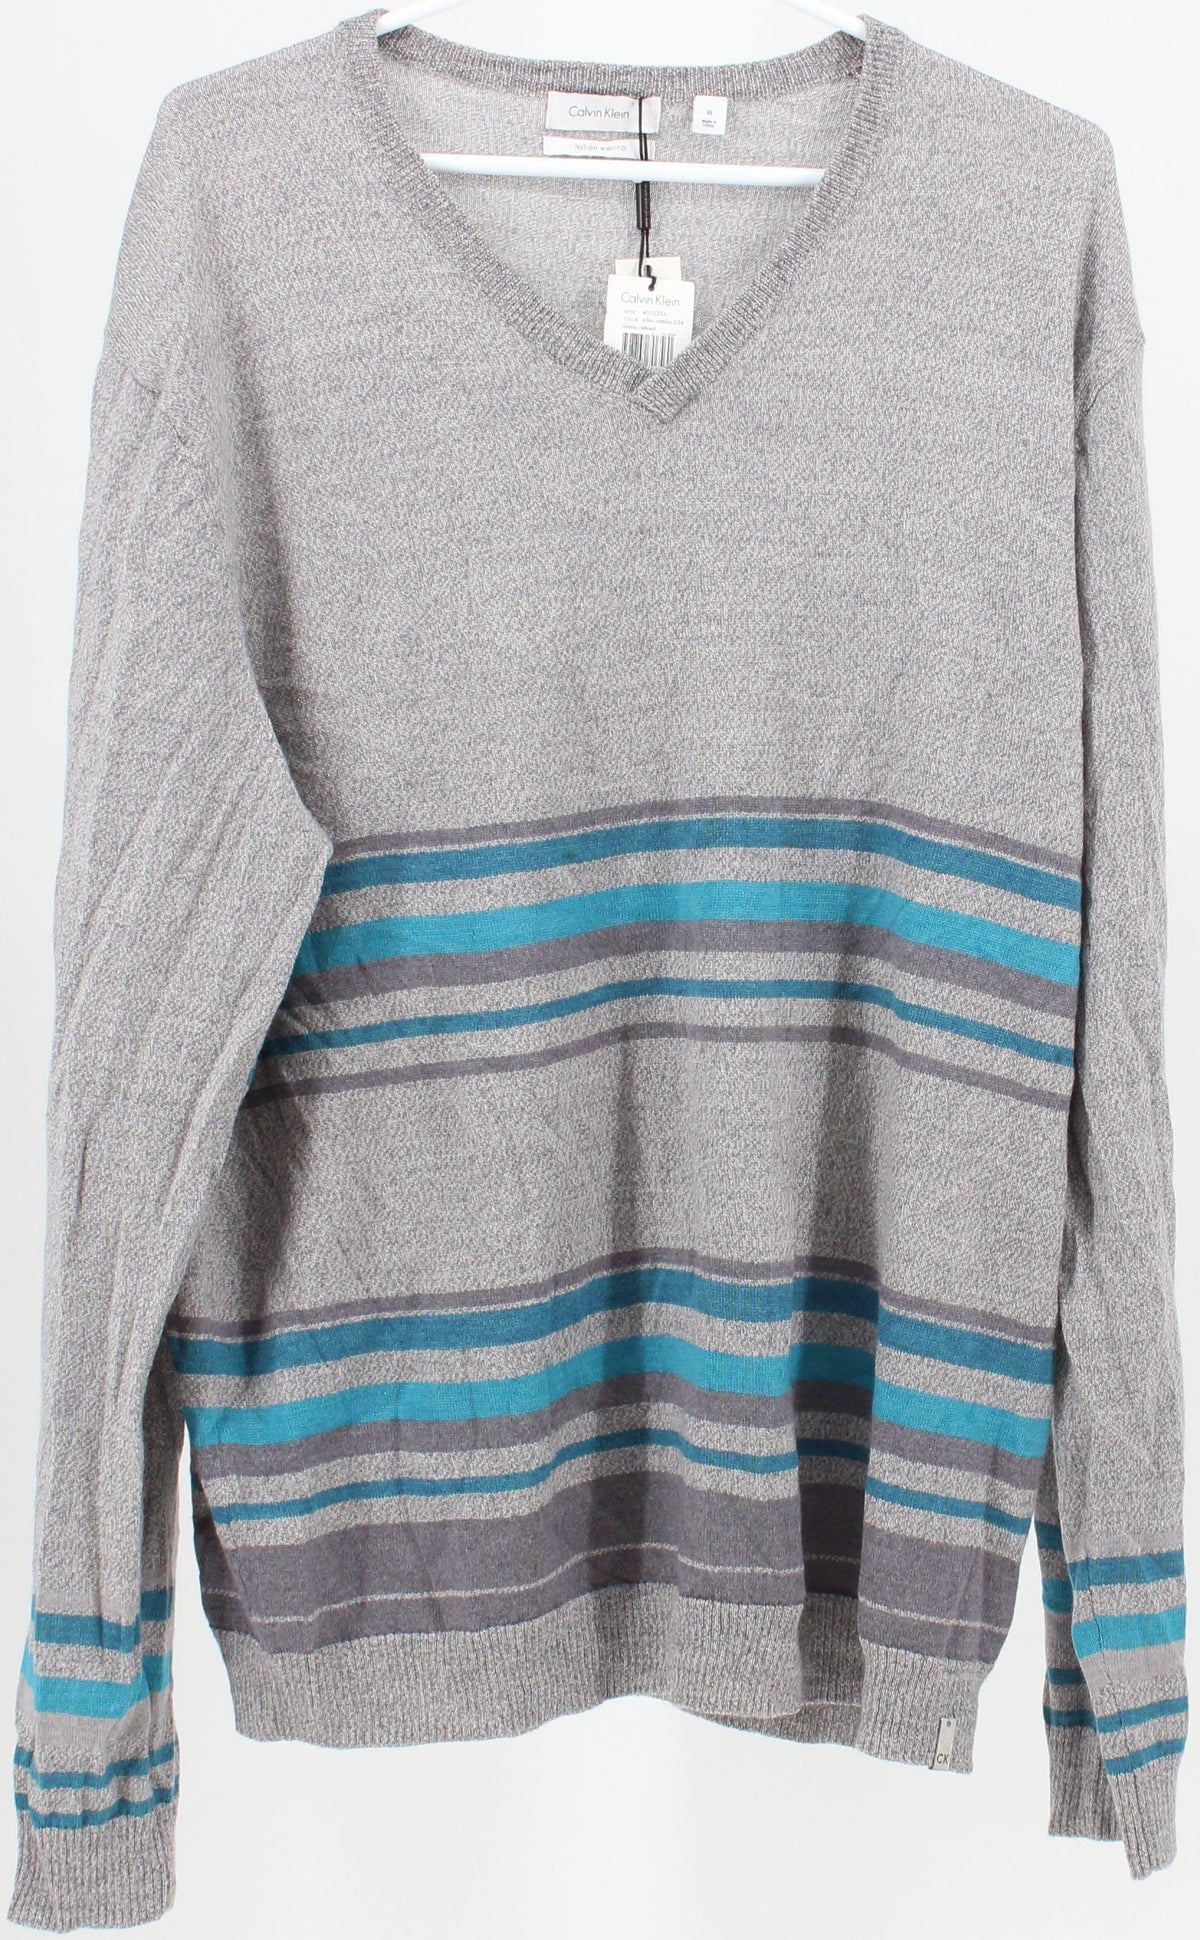 Calvin Klein Grey and Blue Striped V Neck Sweater